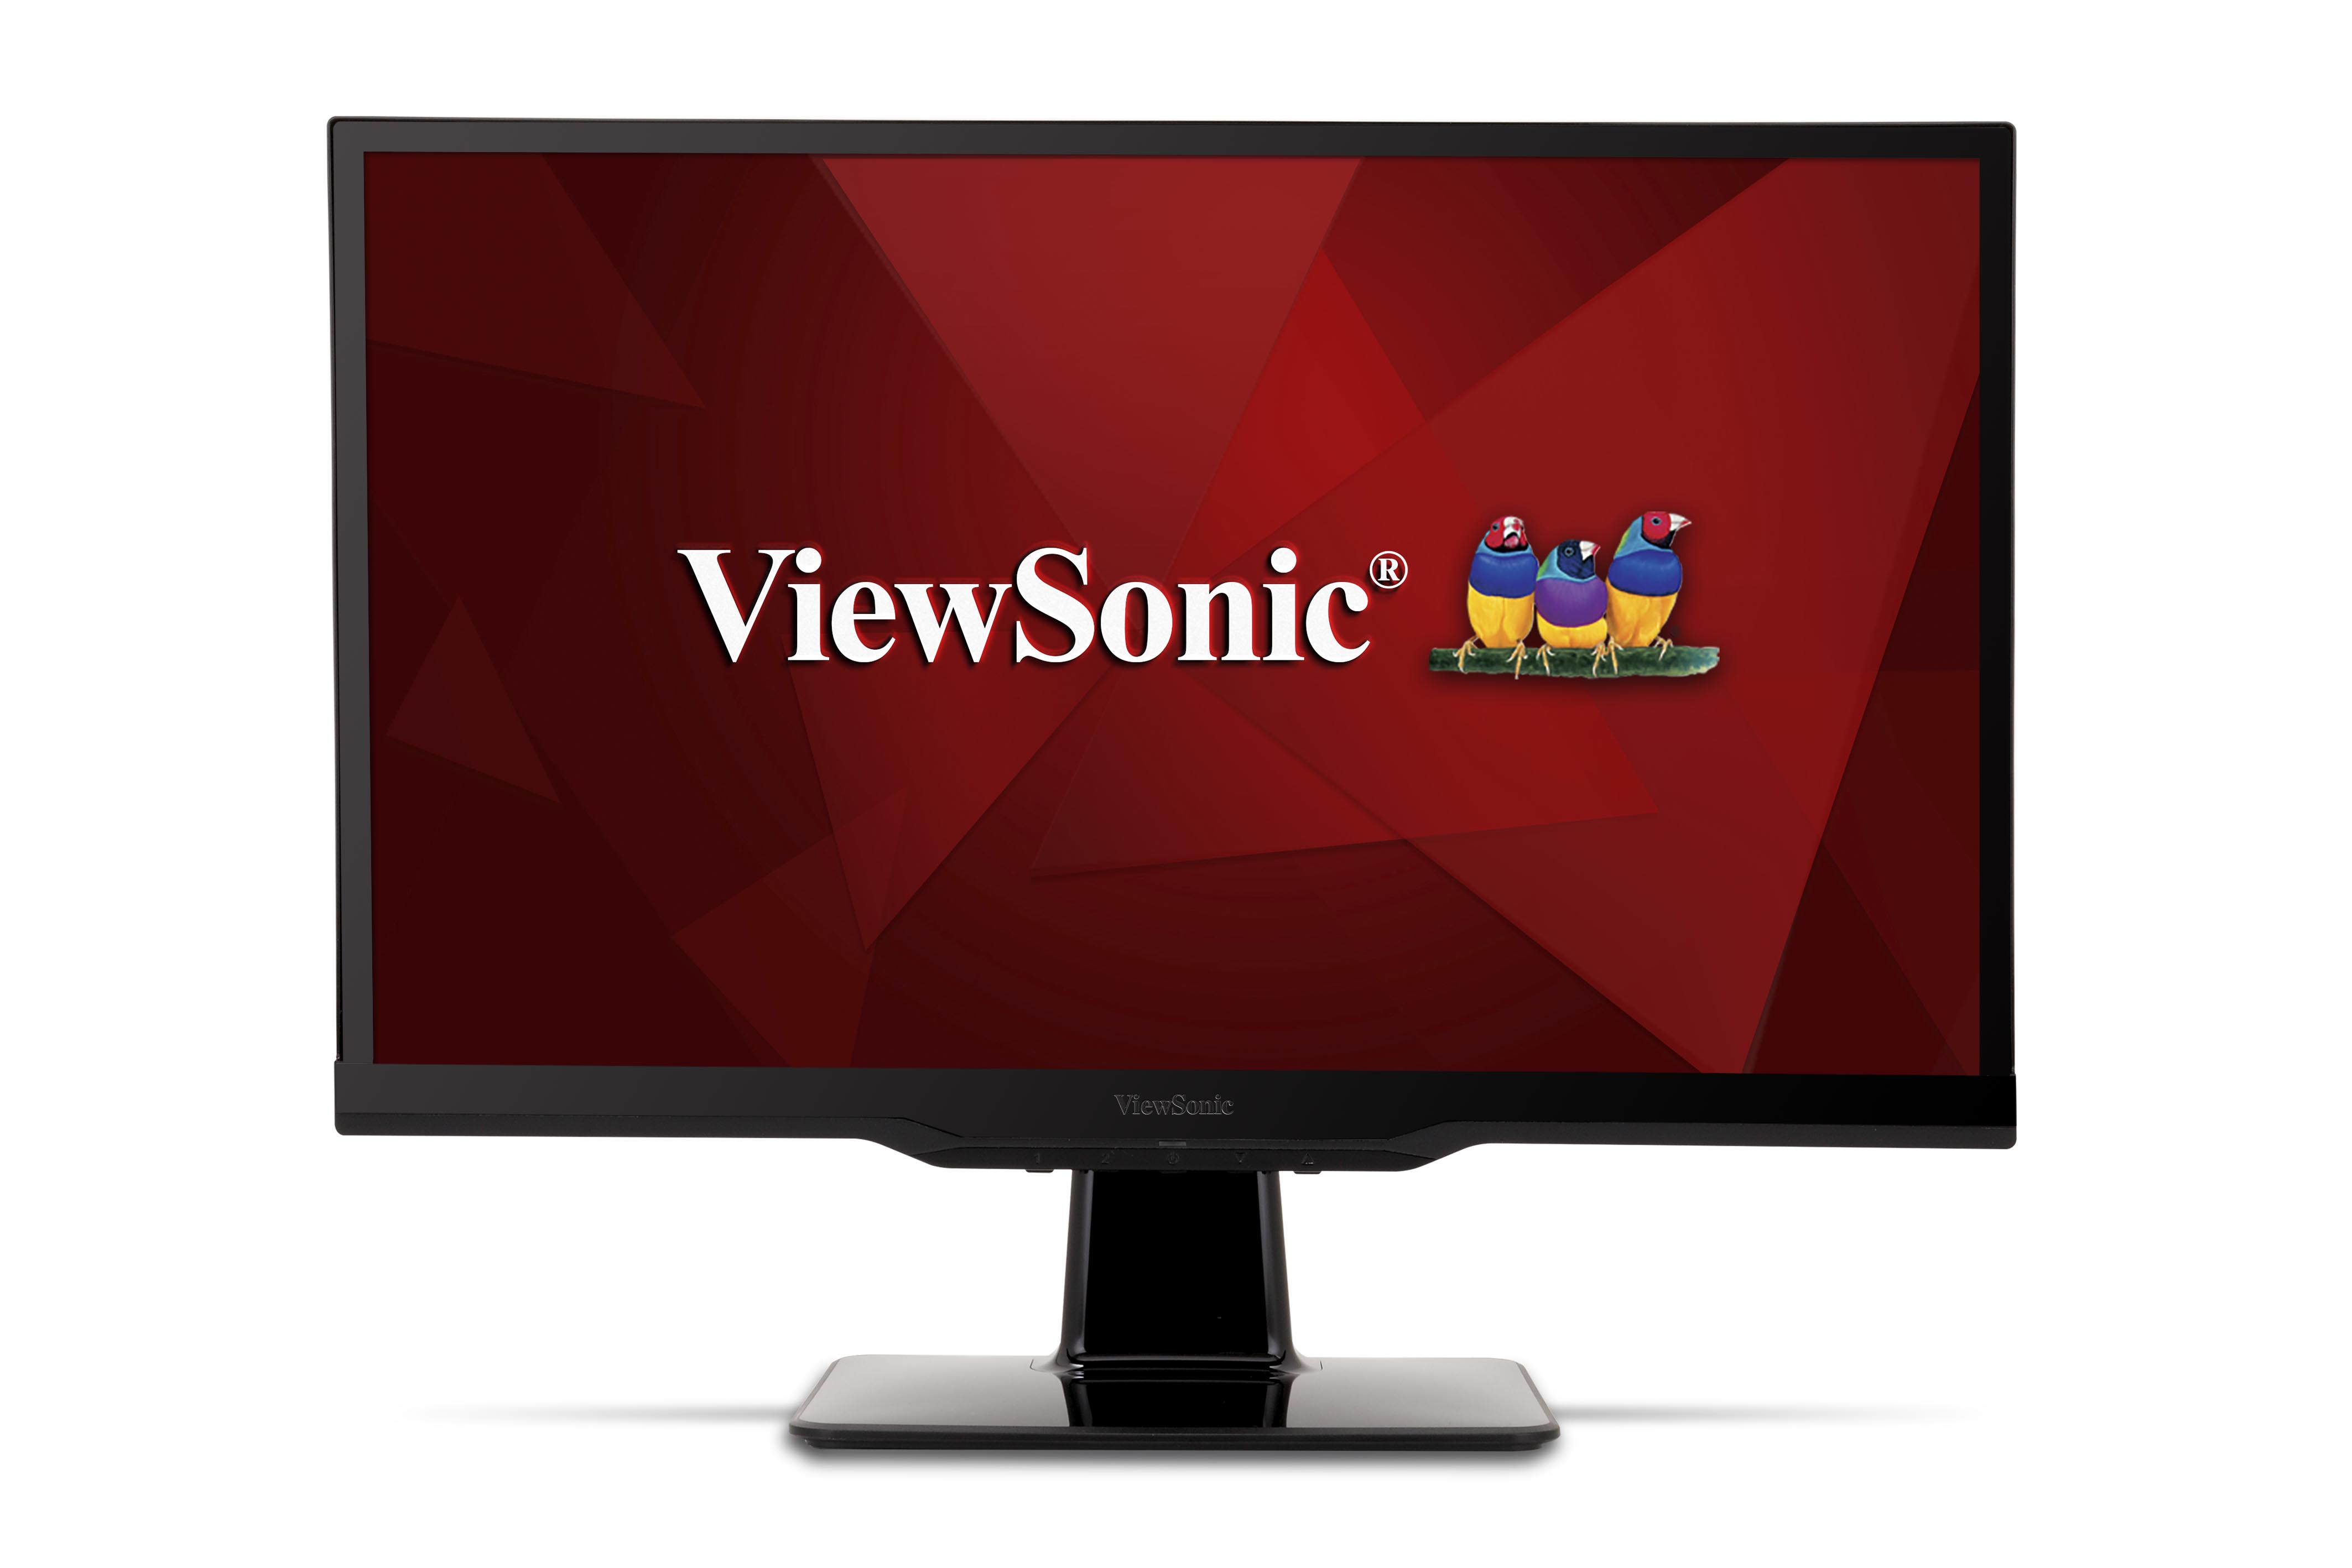 viewsonic drivers for win 7